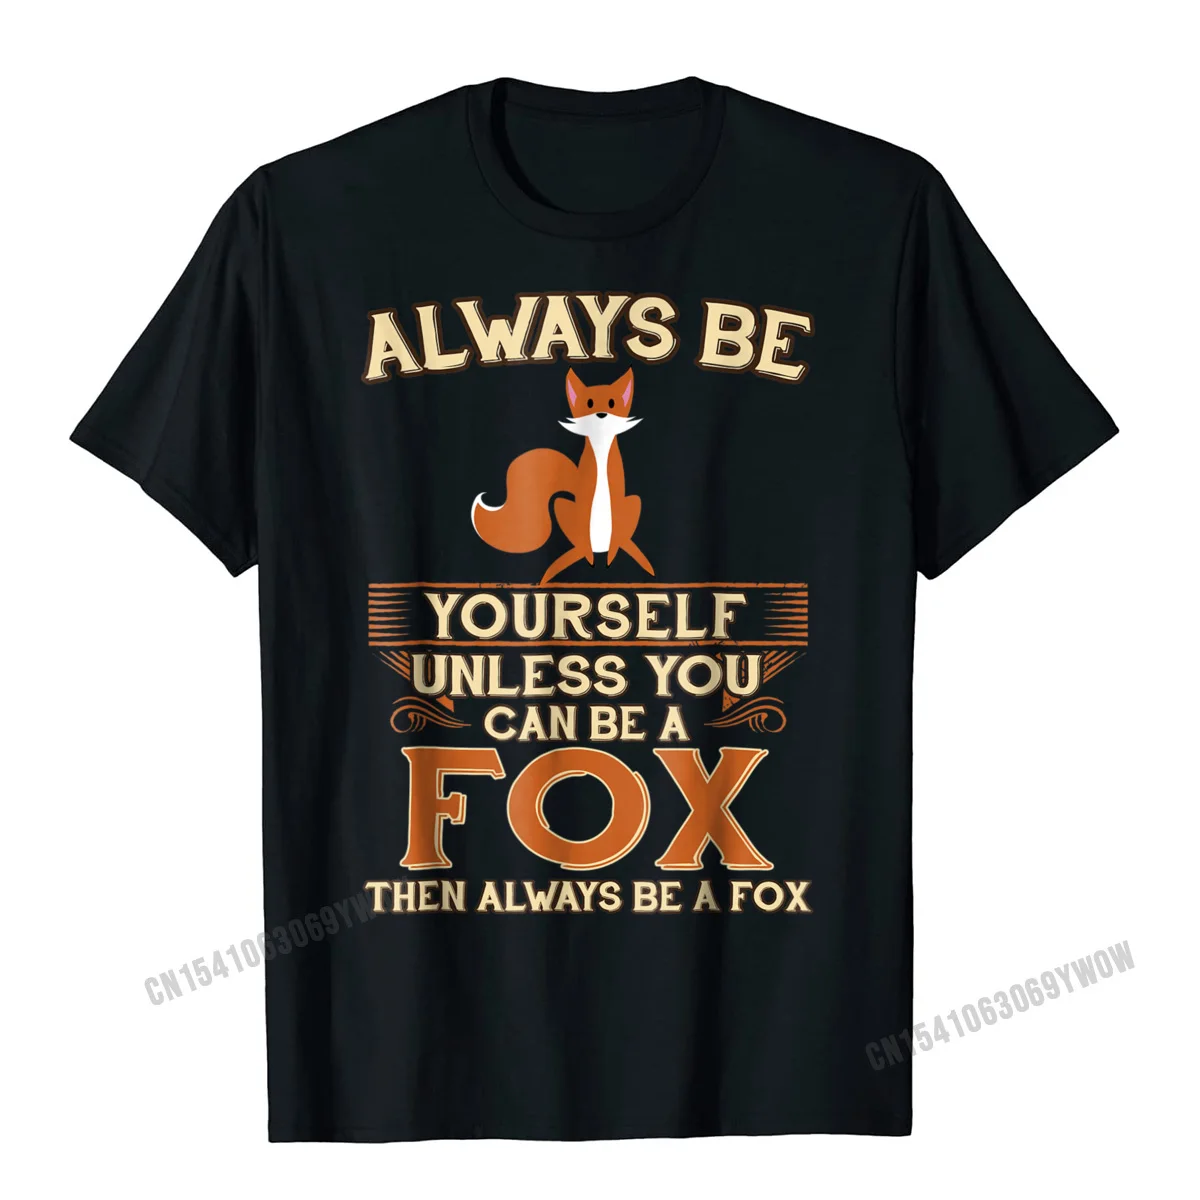 

Always Be Yourself Unless You Can Be A Fox Shirt Funny Gift Designer Men Top T-Shirts Harajuku Cotton Tops & Tees Fitness Tight